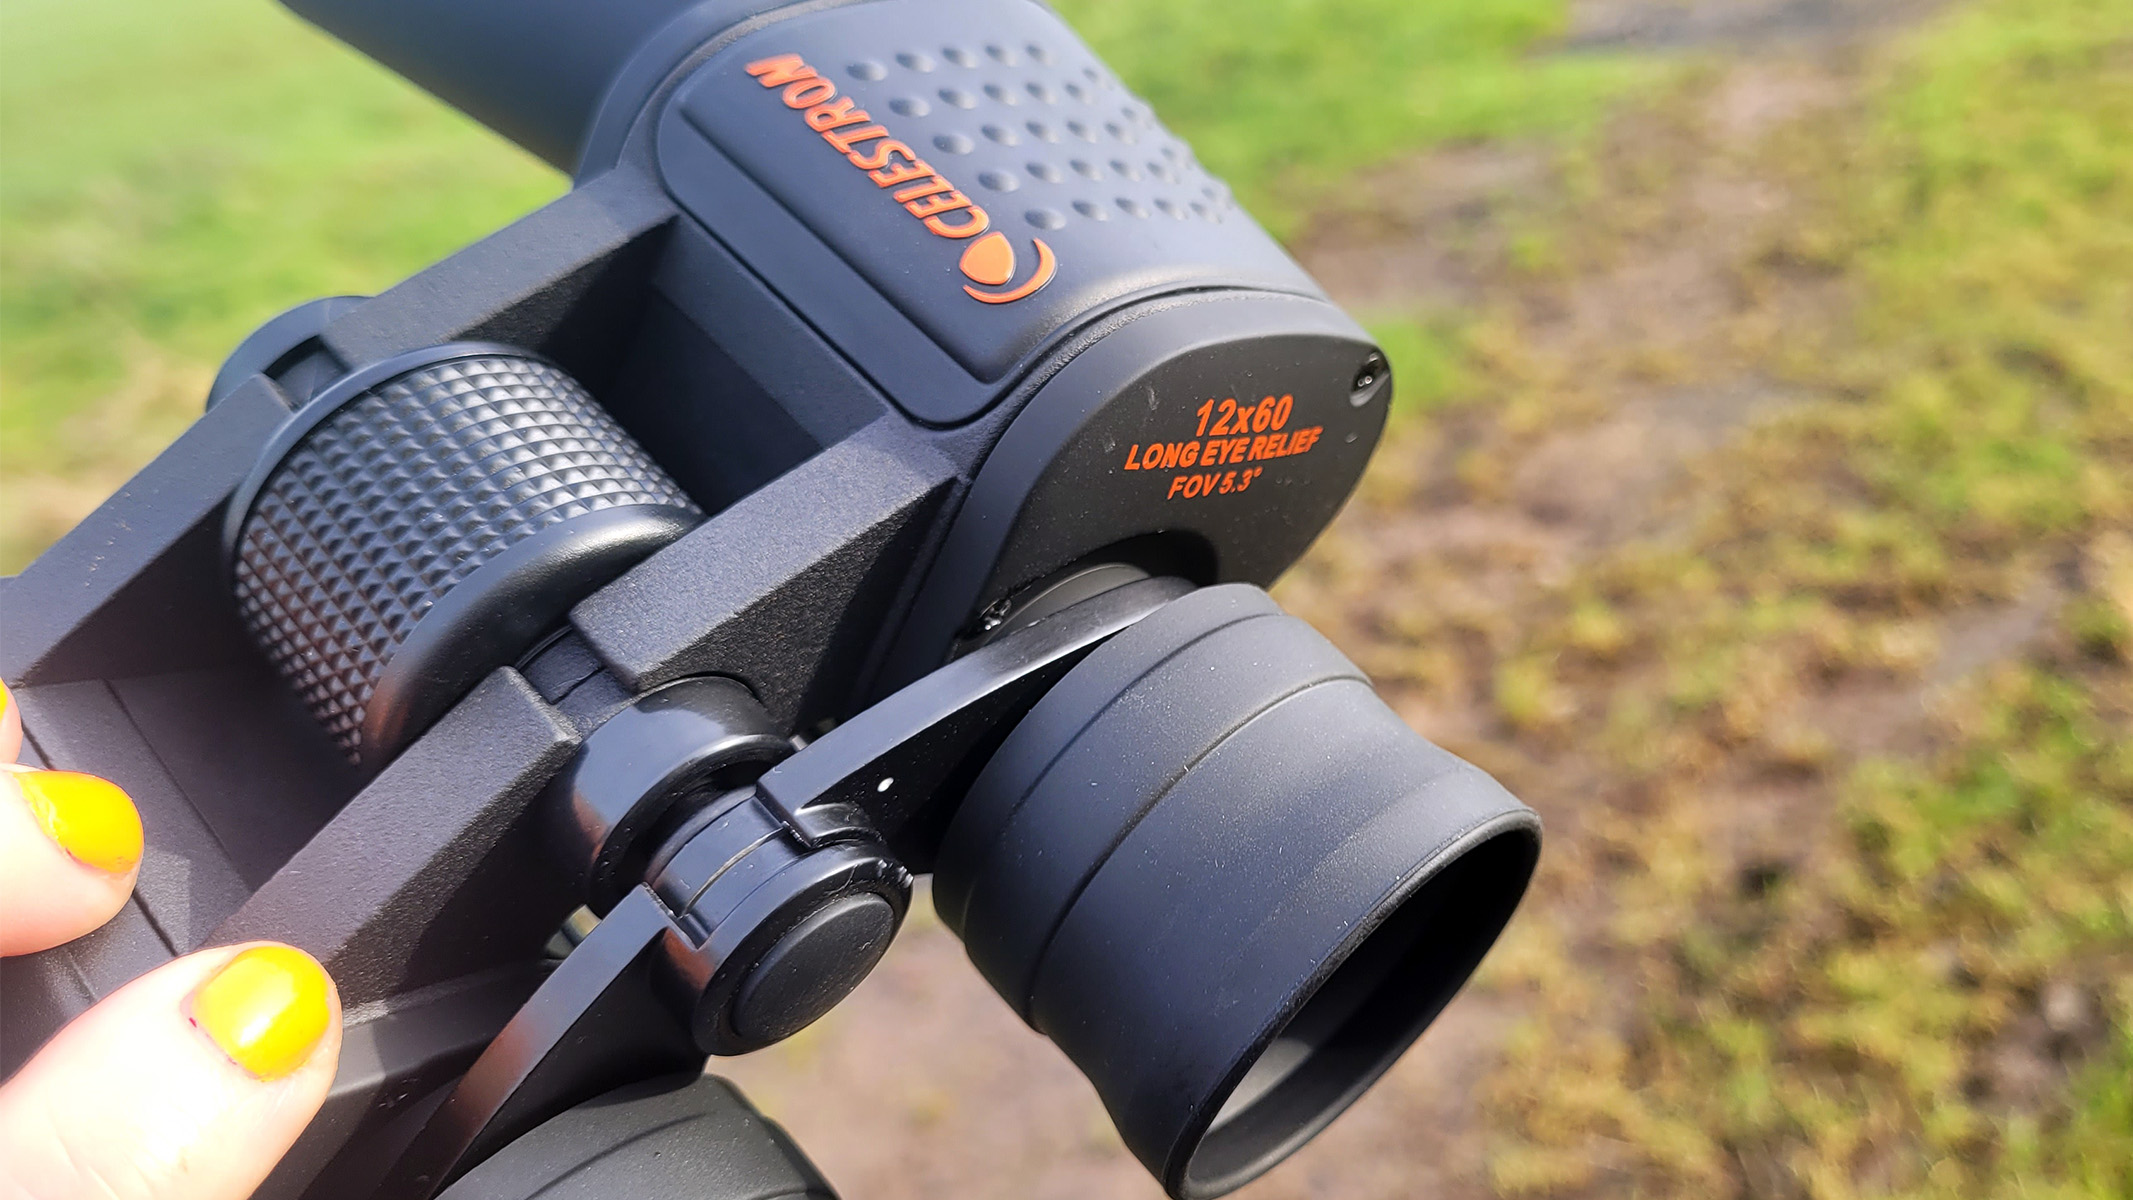 Celestron SkyMaster 12x60 showing the long eye relief and the pimpled rubber coating for extra grip